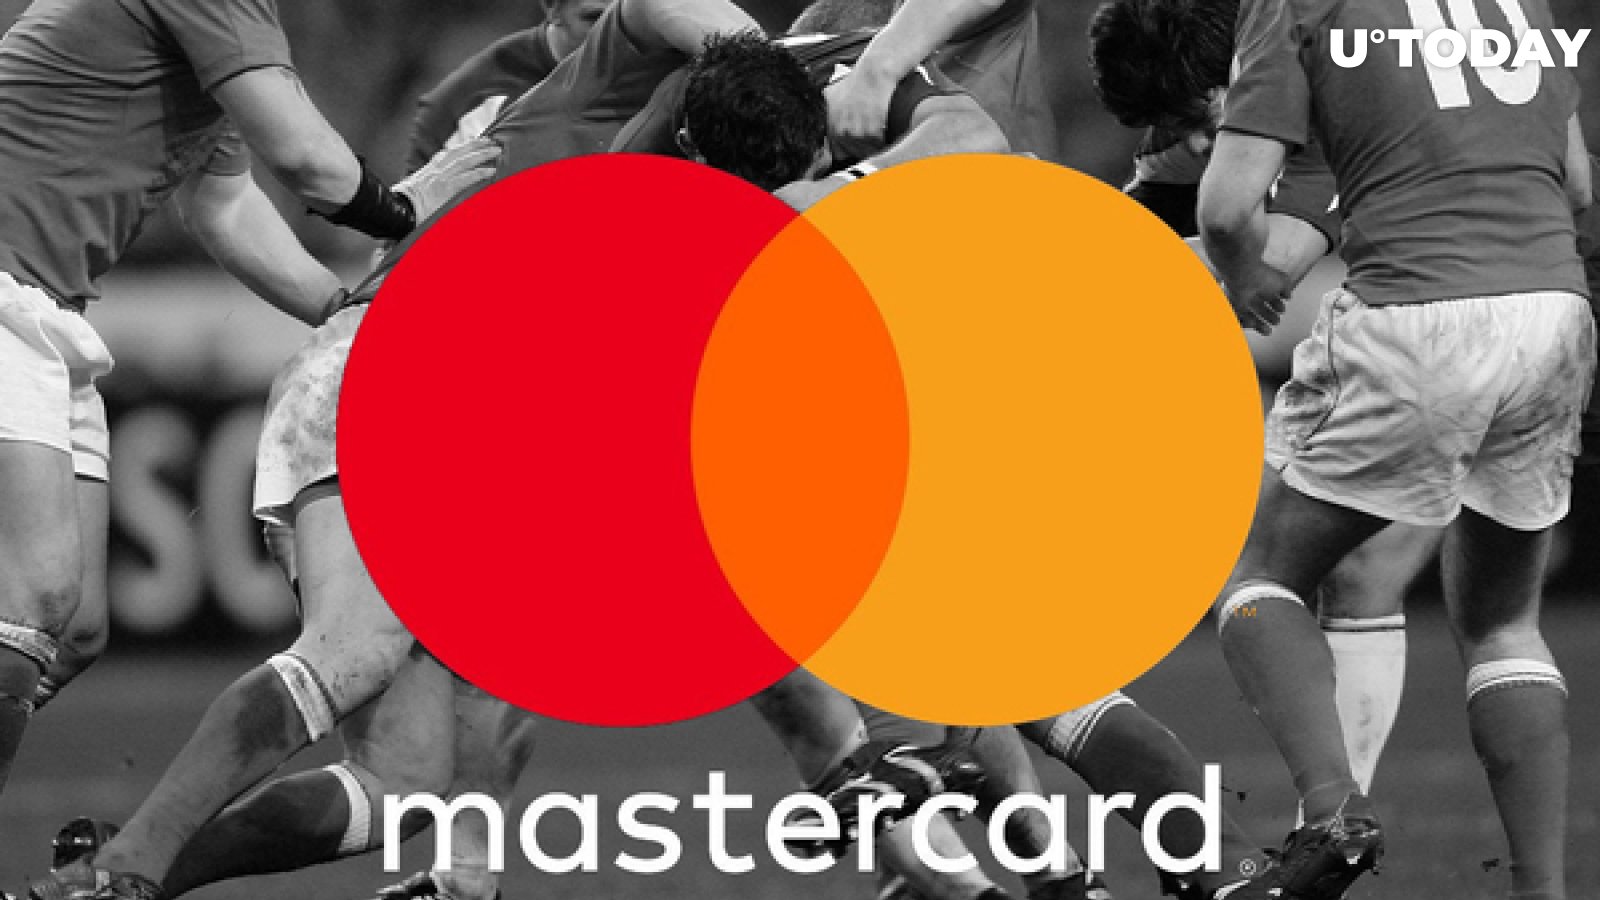 Mastercard Becomes Worldwide Partner for Rugby World Cup 2023 After Announcing Crypto Payments Later in 2021